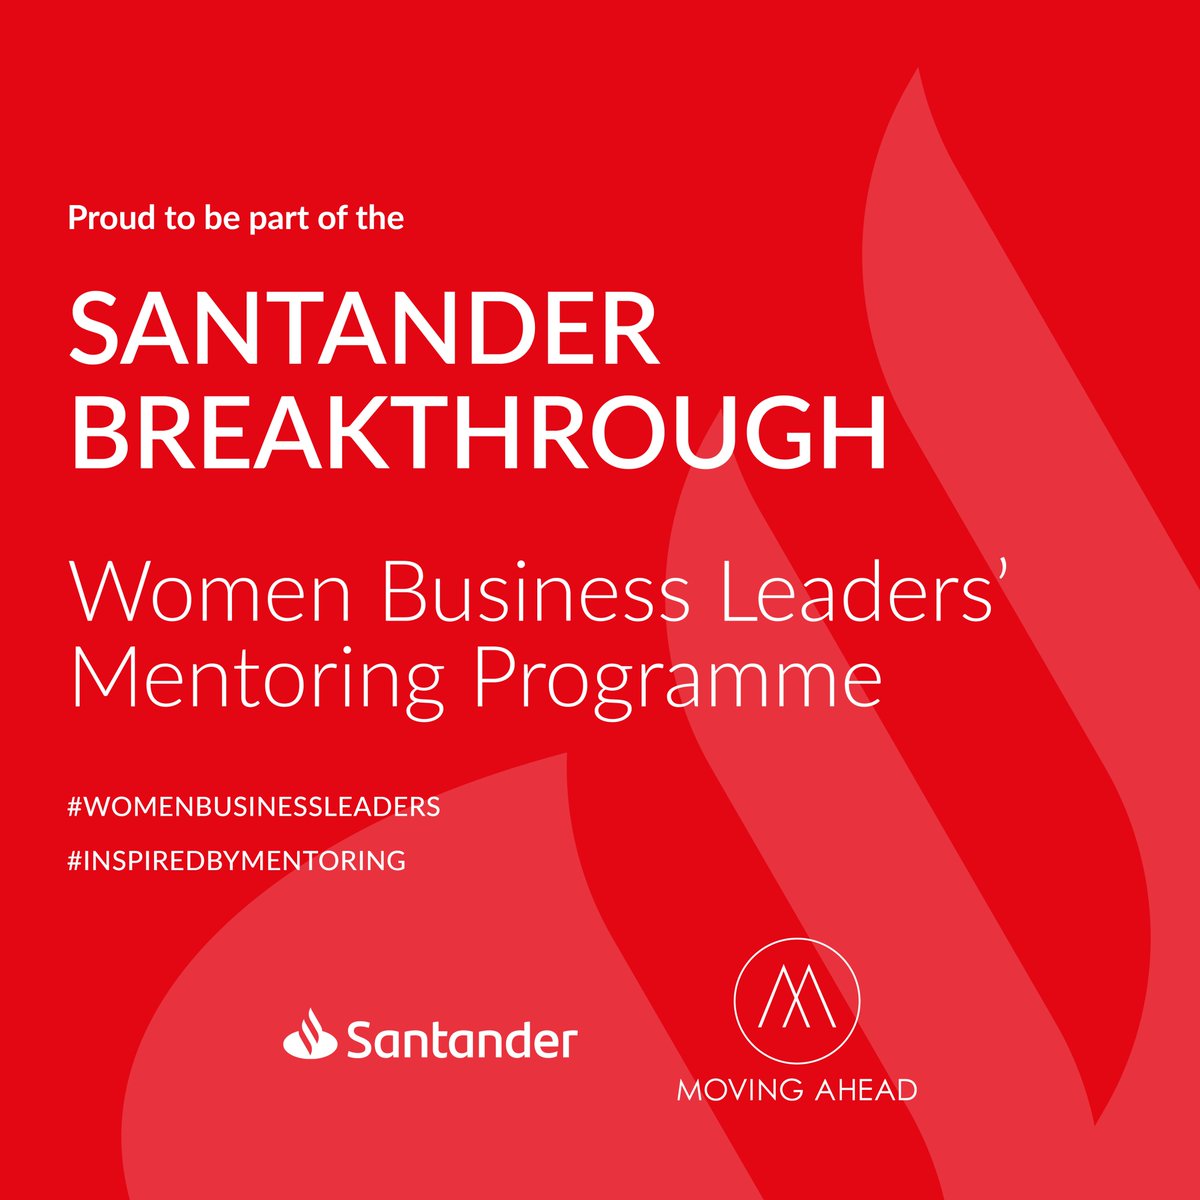 Three years ago I was a mentor on this programme. This year I am going to be a Mentor. Excited about the opportunity, with @santanderuk and @_MovingAhead. Let's see who I get matched with!